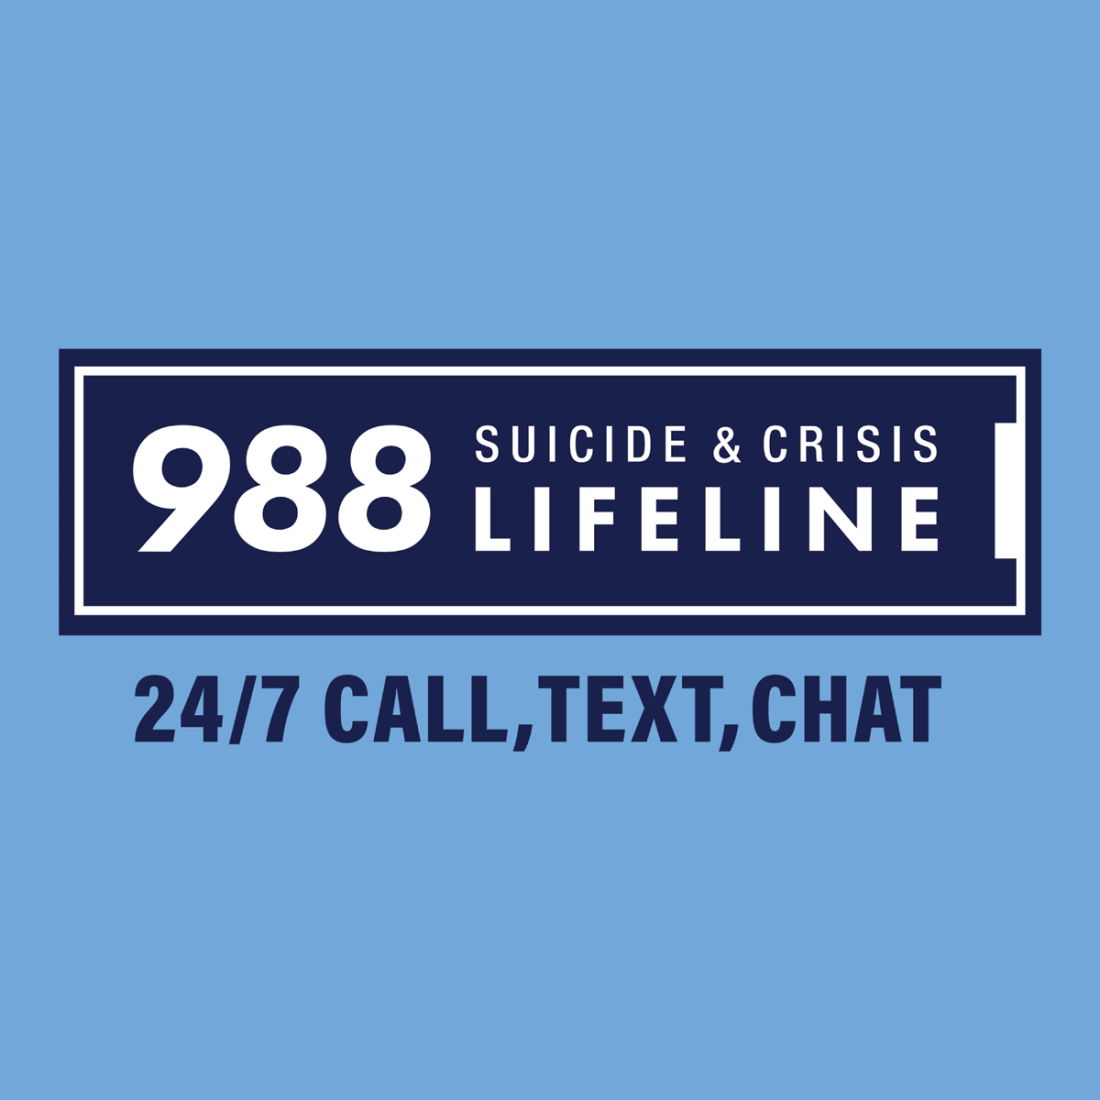 988 Suicide & Crisis Lifeline - 24/7 call, text, chat on a blue background